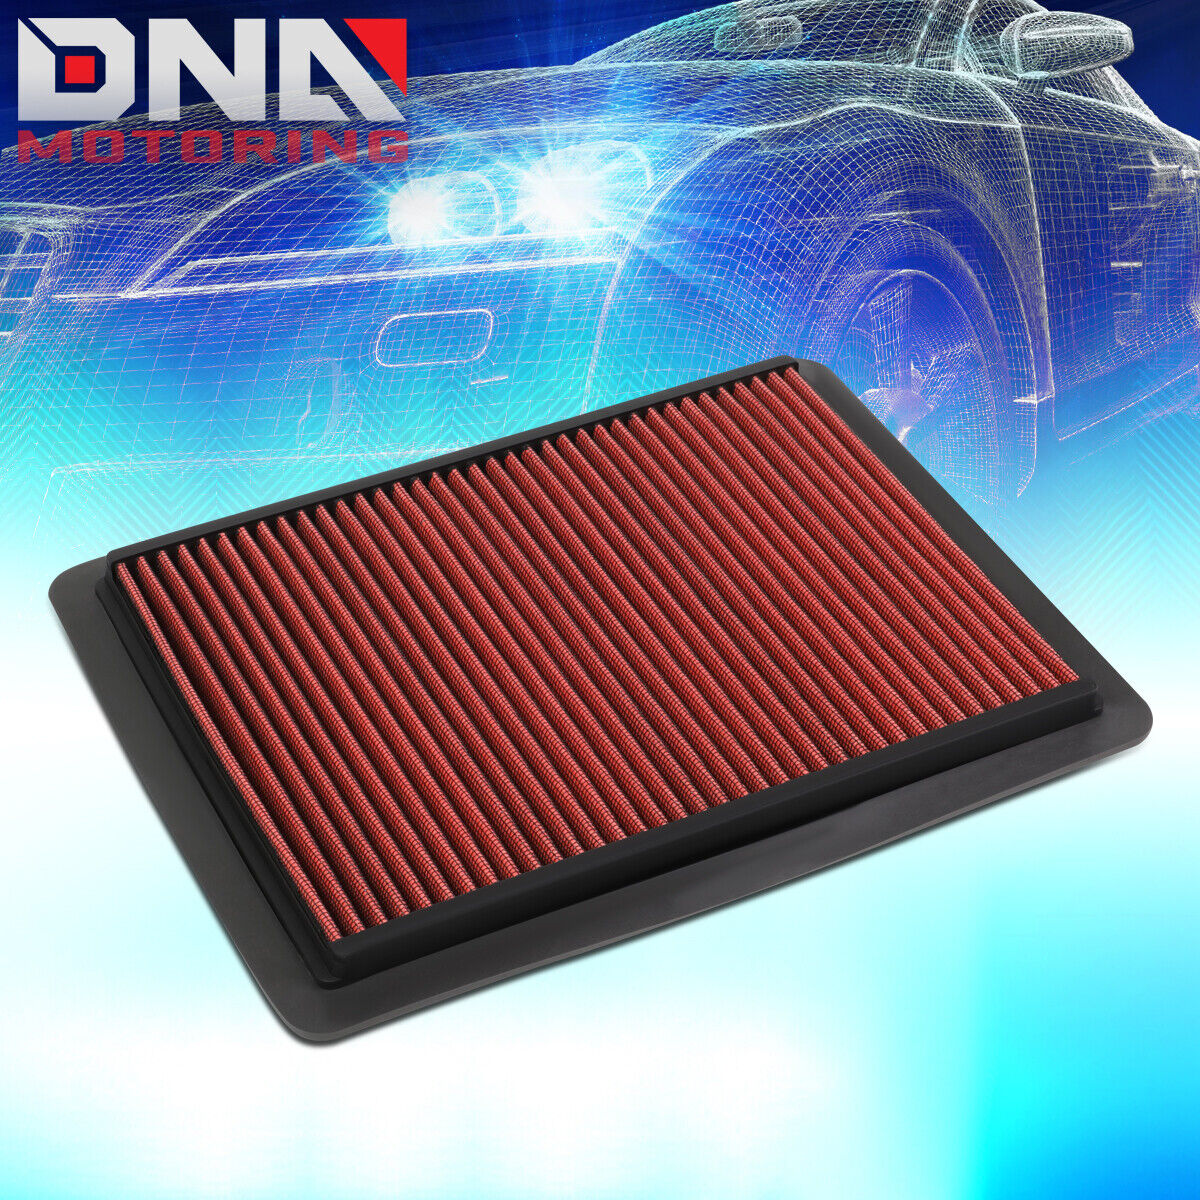 FOR 1999-2009 BUICK CENTURY CHEVY IMPALA PONTIAC RED HIGH FLOW AIR FILTER PANEL